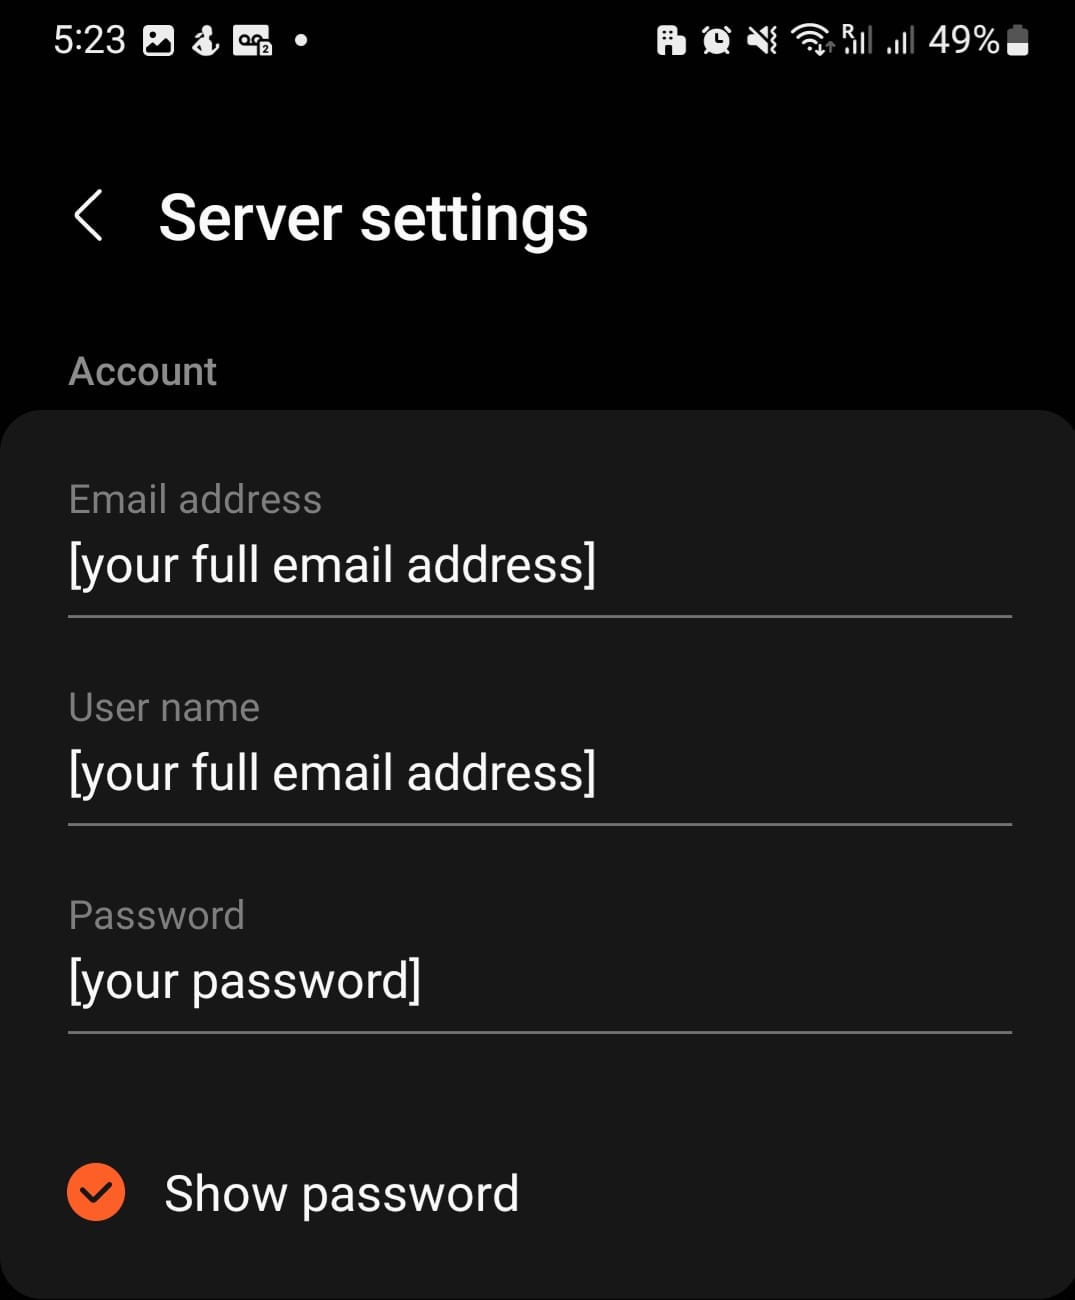 Samsung email app server account settings